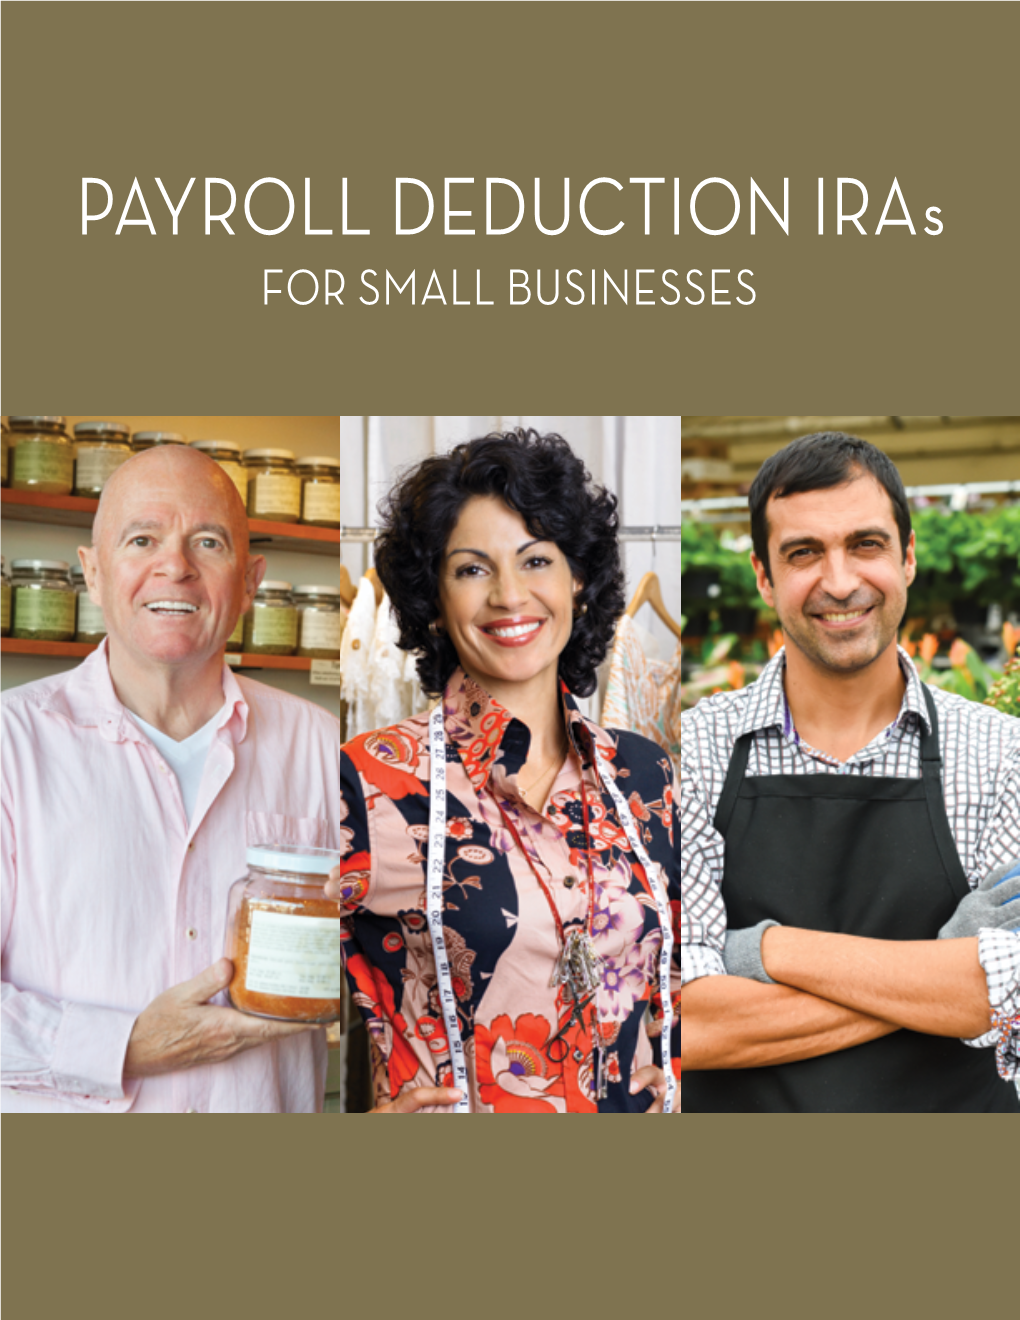 PAYROLL DEDUCTION Iras for SMALL BUSINESSES Payroll Deduction Iras for Small Businesses Is a Joint Project of the U.S